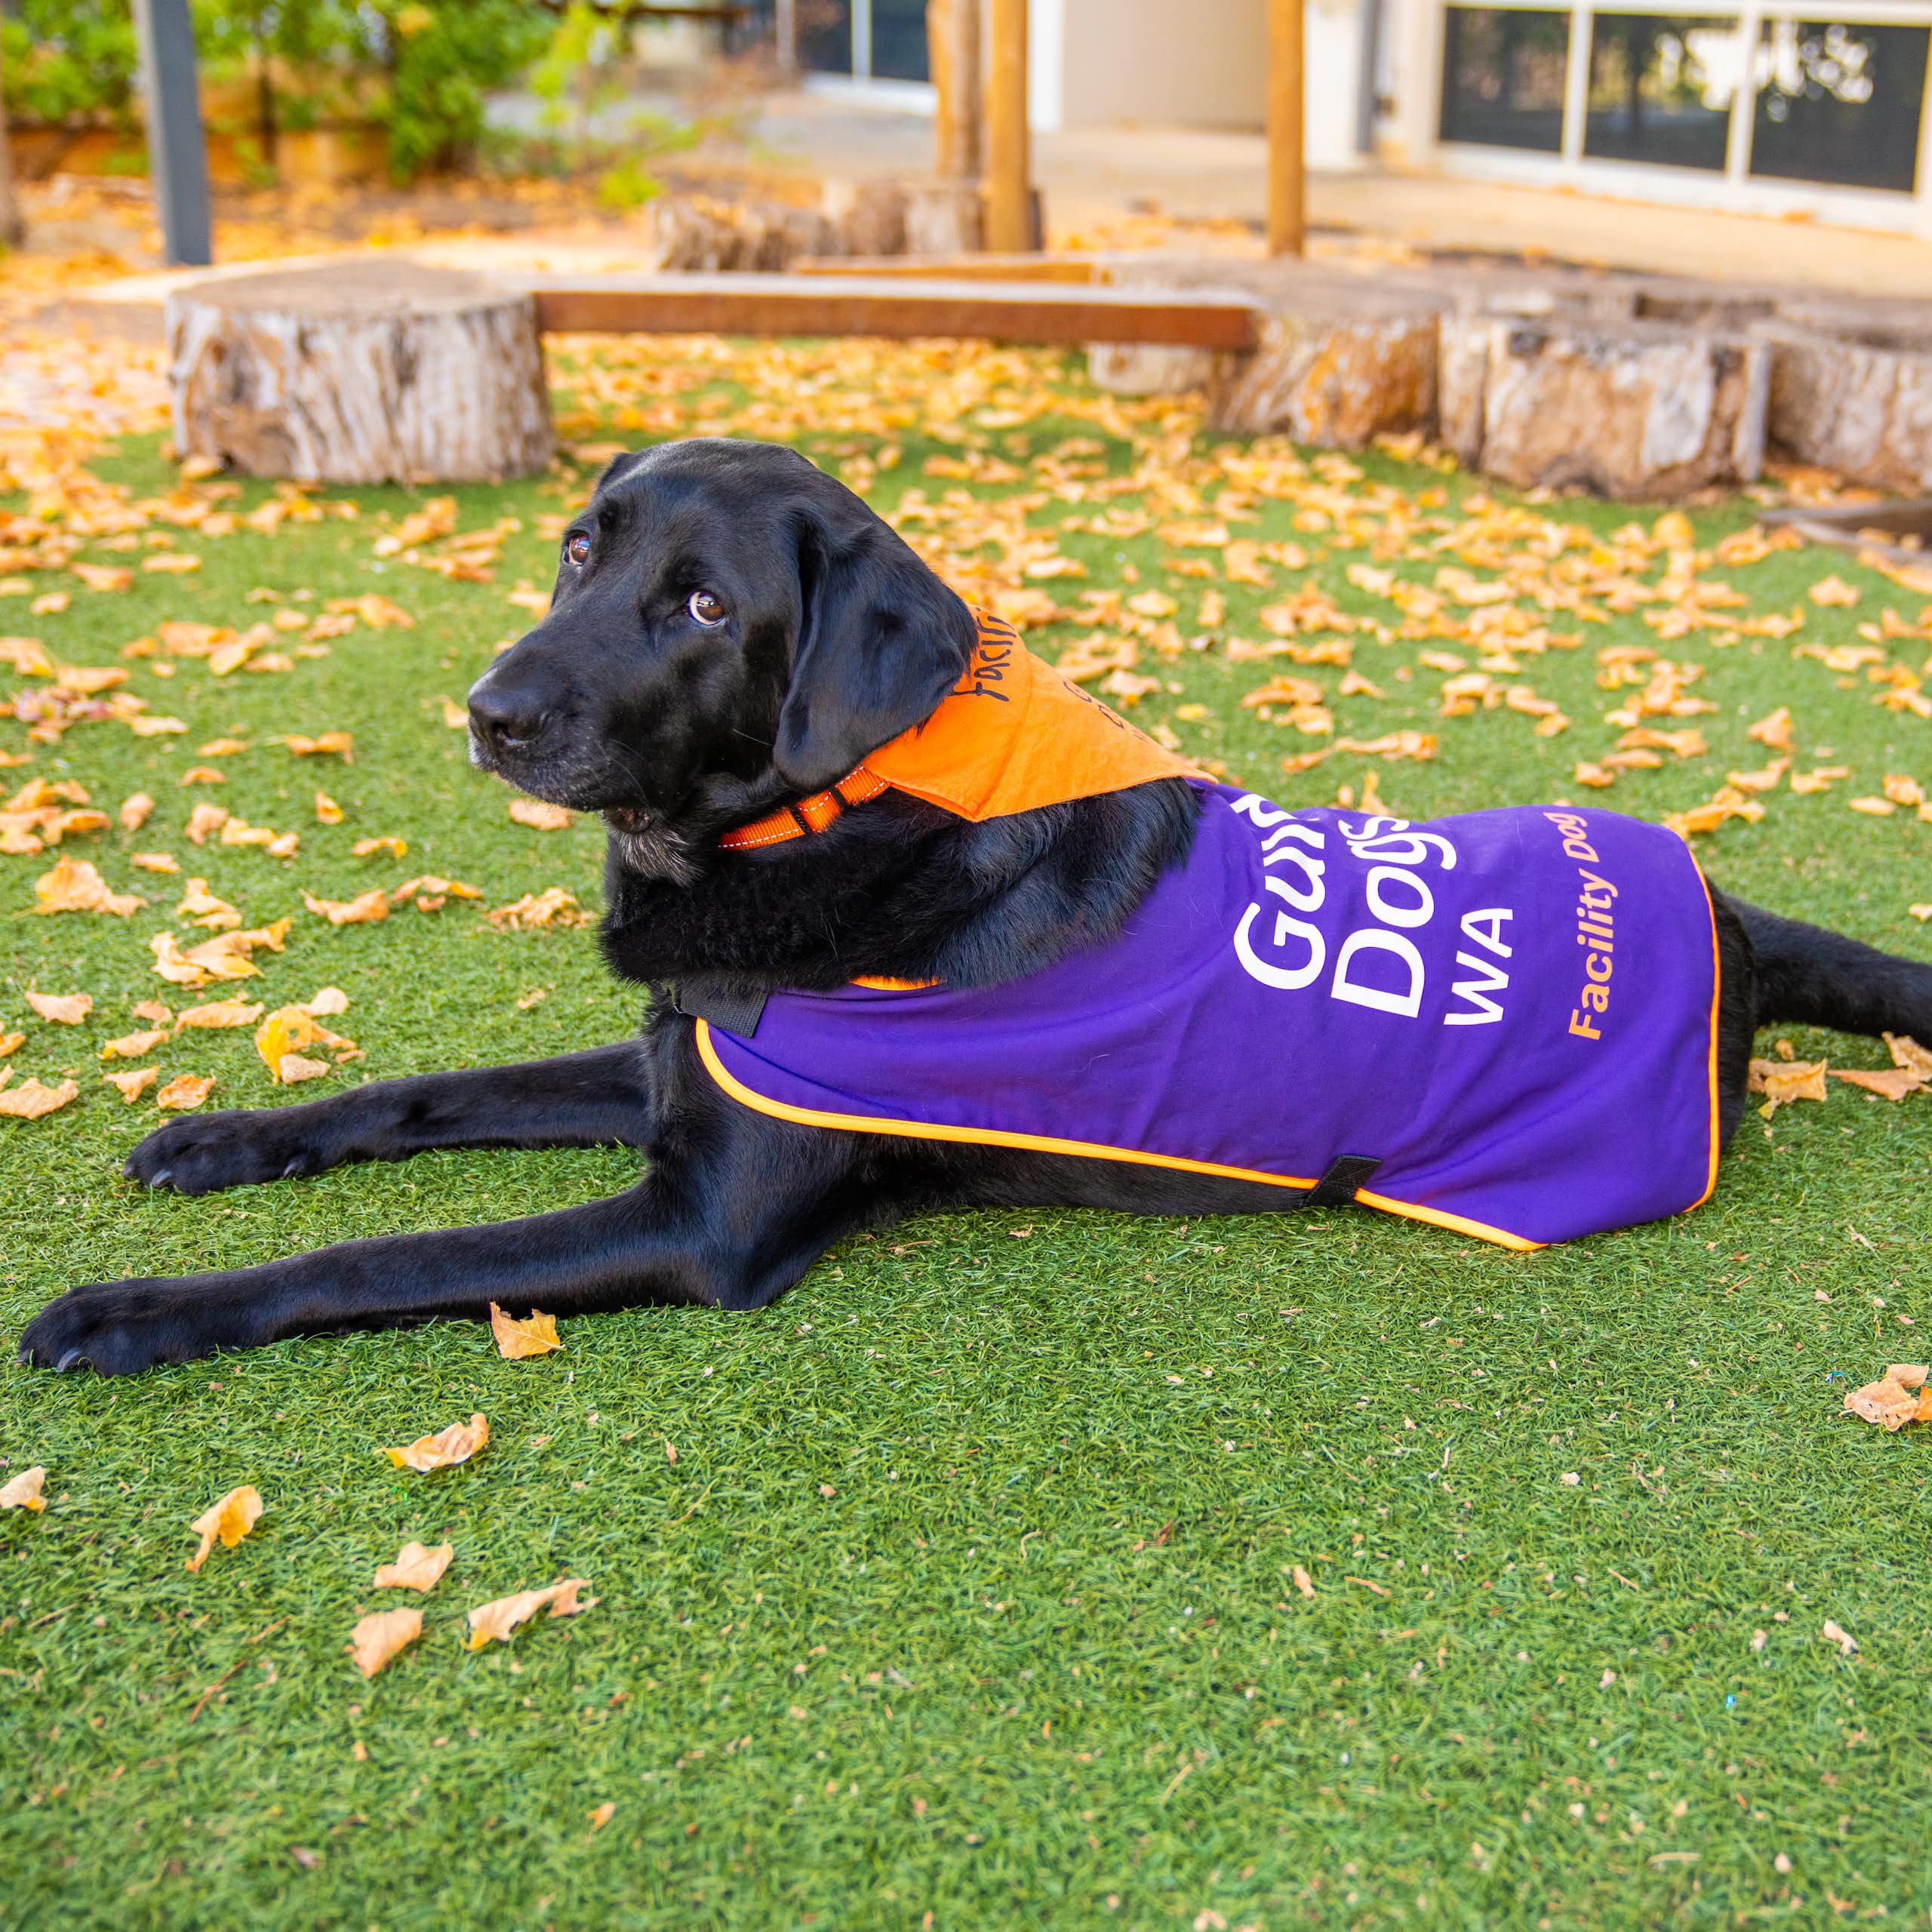 Winston, a justice facility dog trained by Guide Dogs WA